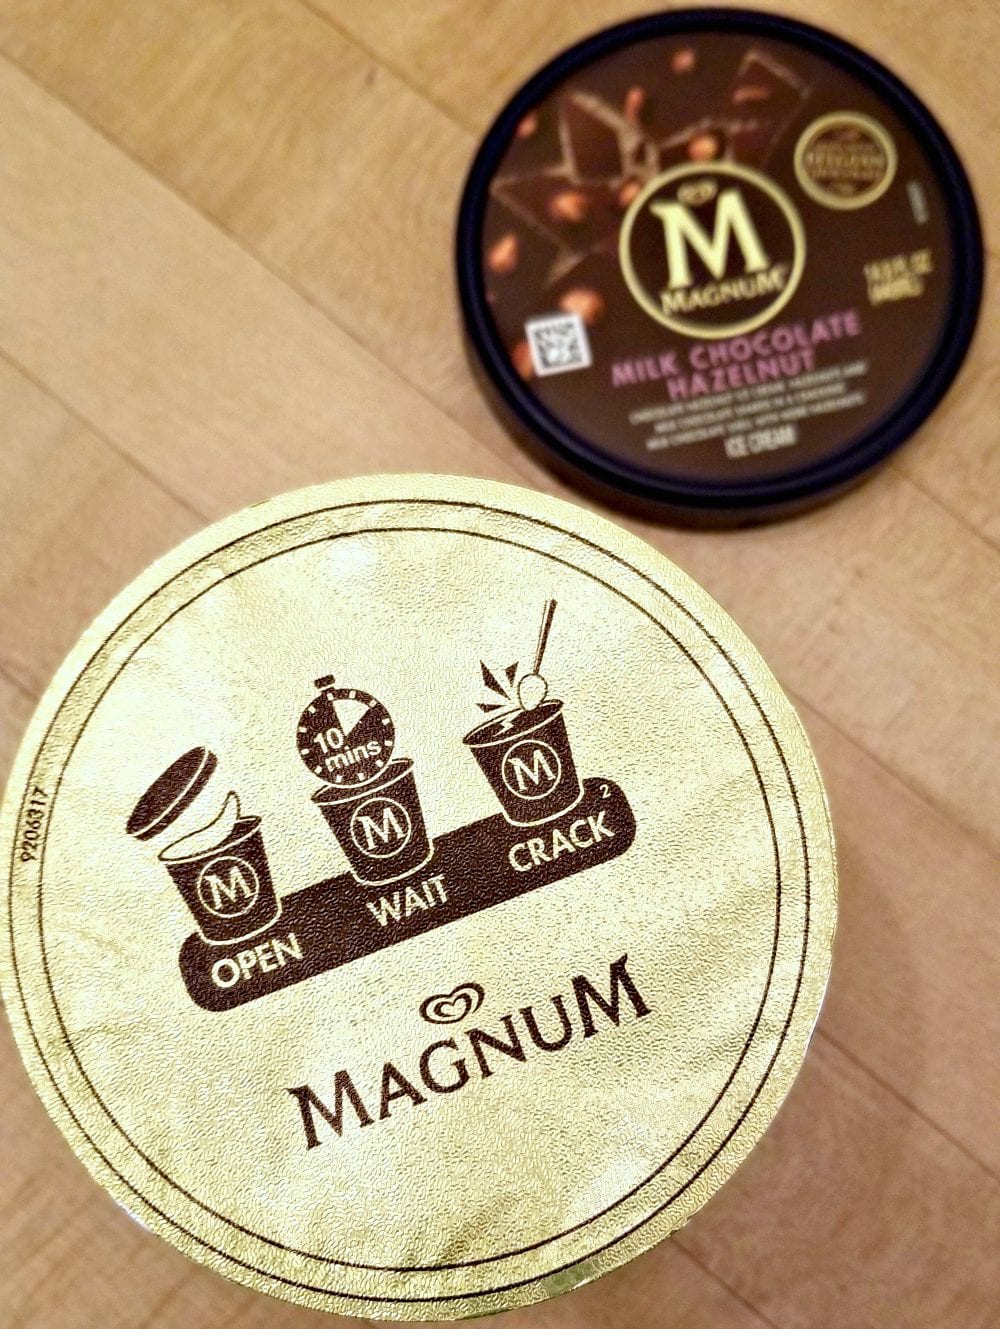 Tub of Magnum ice cream with the lid off